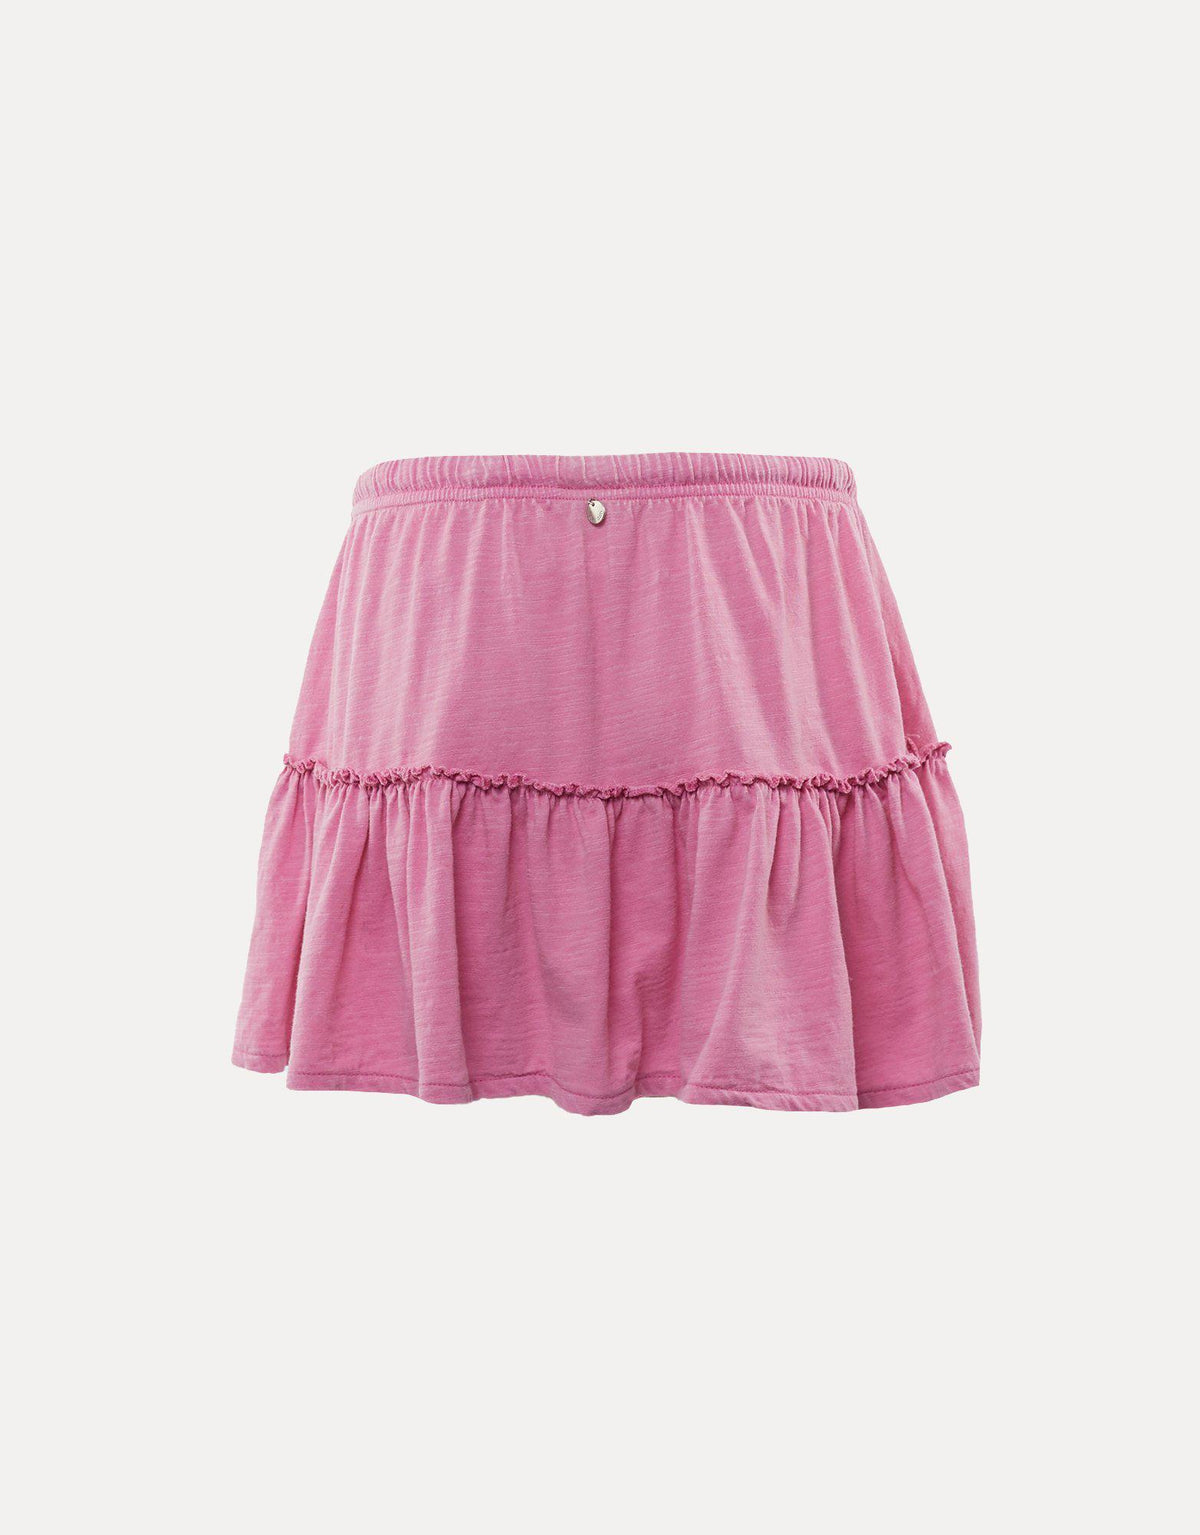 Eve Girl 8-16-Essential Skirt Candy Pink-Edge Clothing